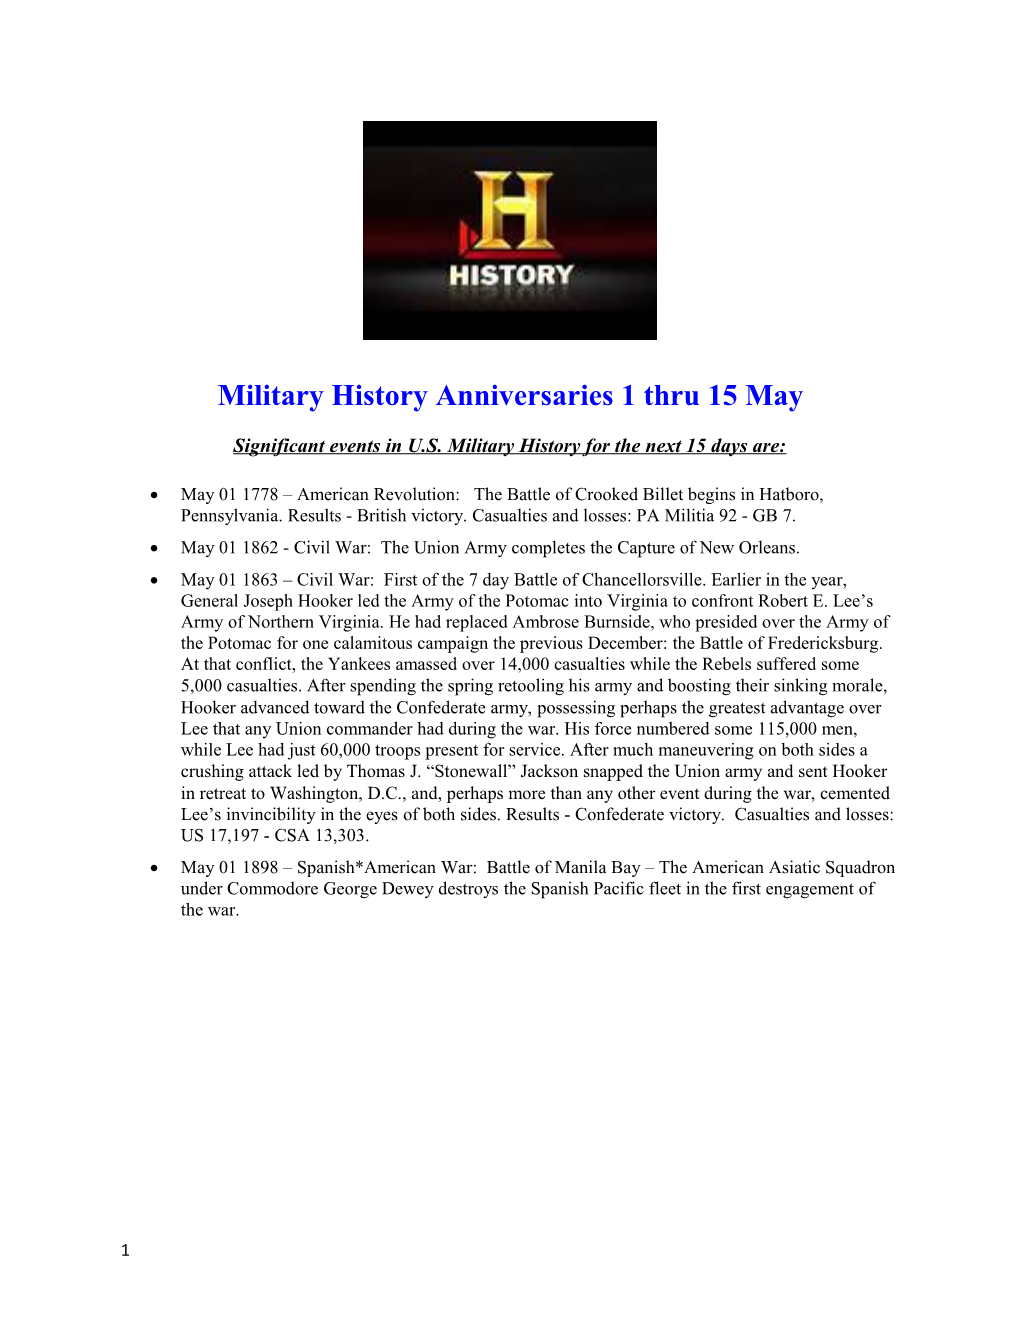 Significant Events in U.S. Military History for the Next 15 Days Are